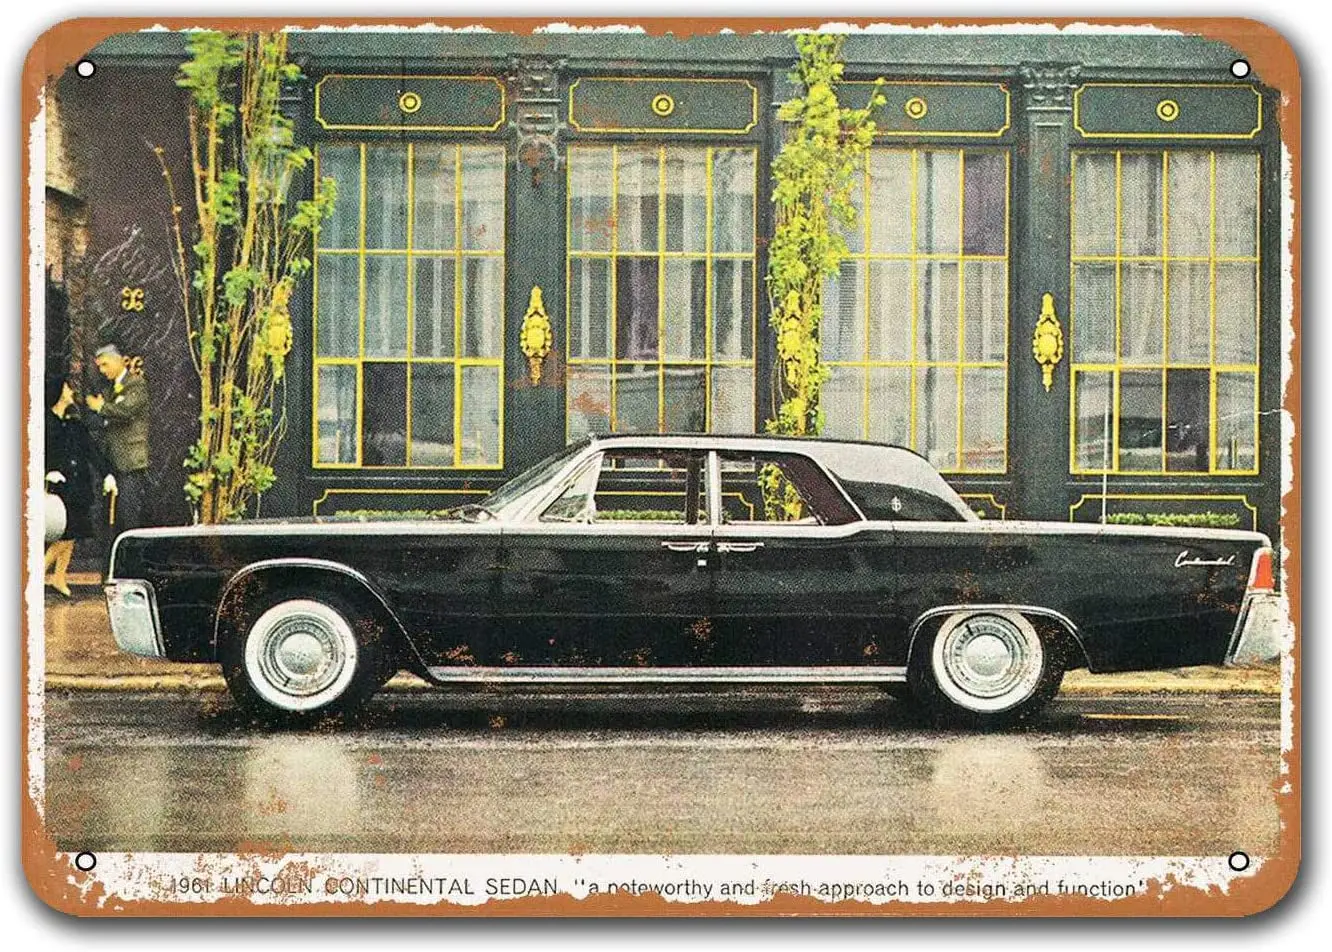 

1961 Lincoln Continental Car Tin Signs Vintage, Sisoso Metal Plaques Poster Garage Man Cave Retro Wall Decor 16x12 inch